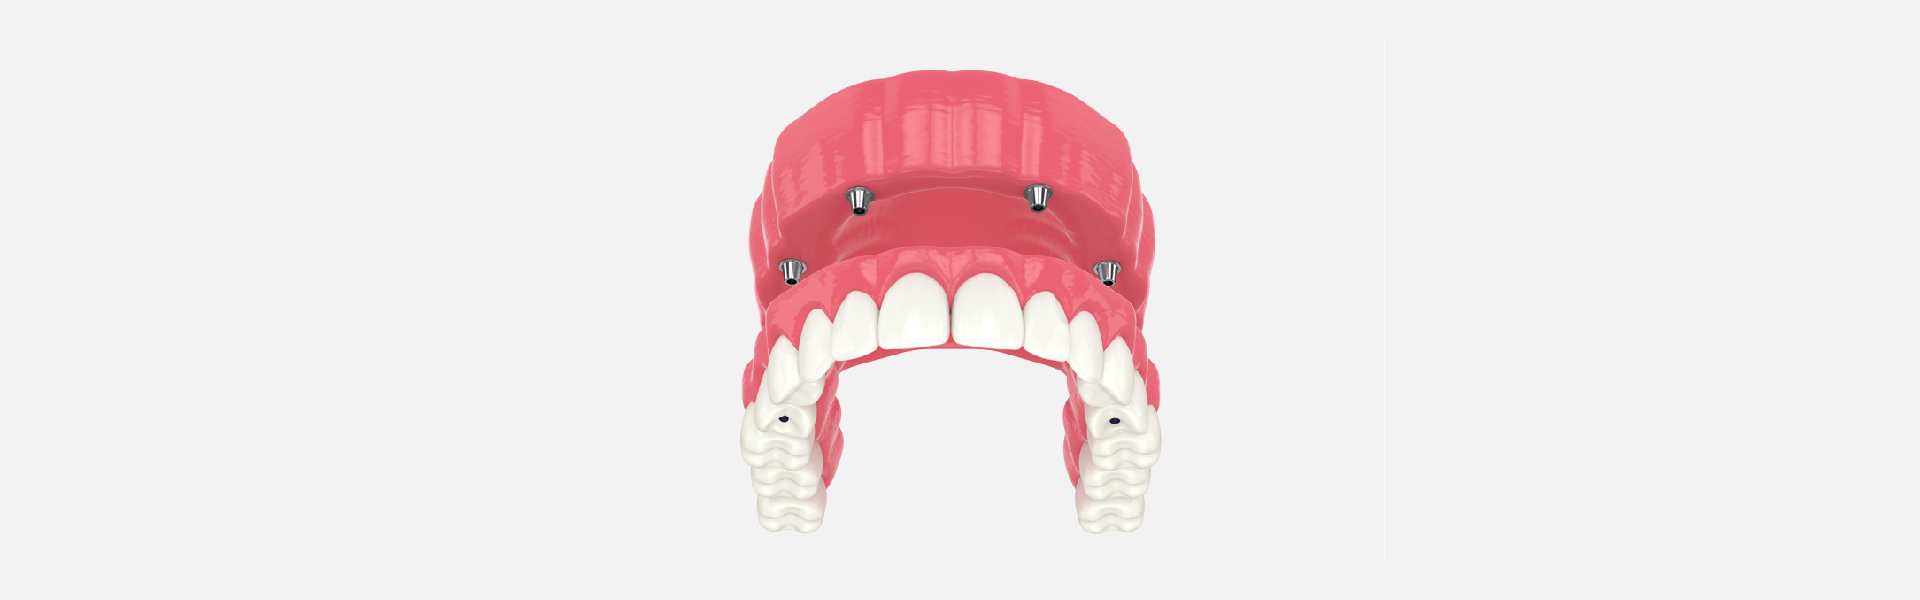 All-on-4 Implants Vs. Traditional Dentures: Which Is Suitable for You?